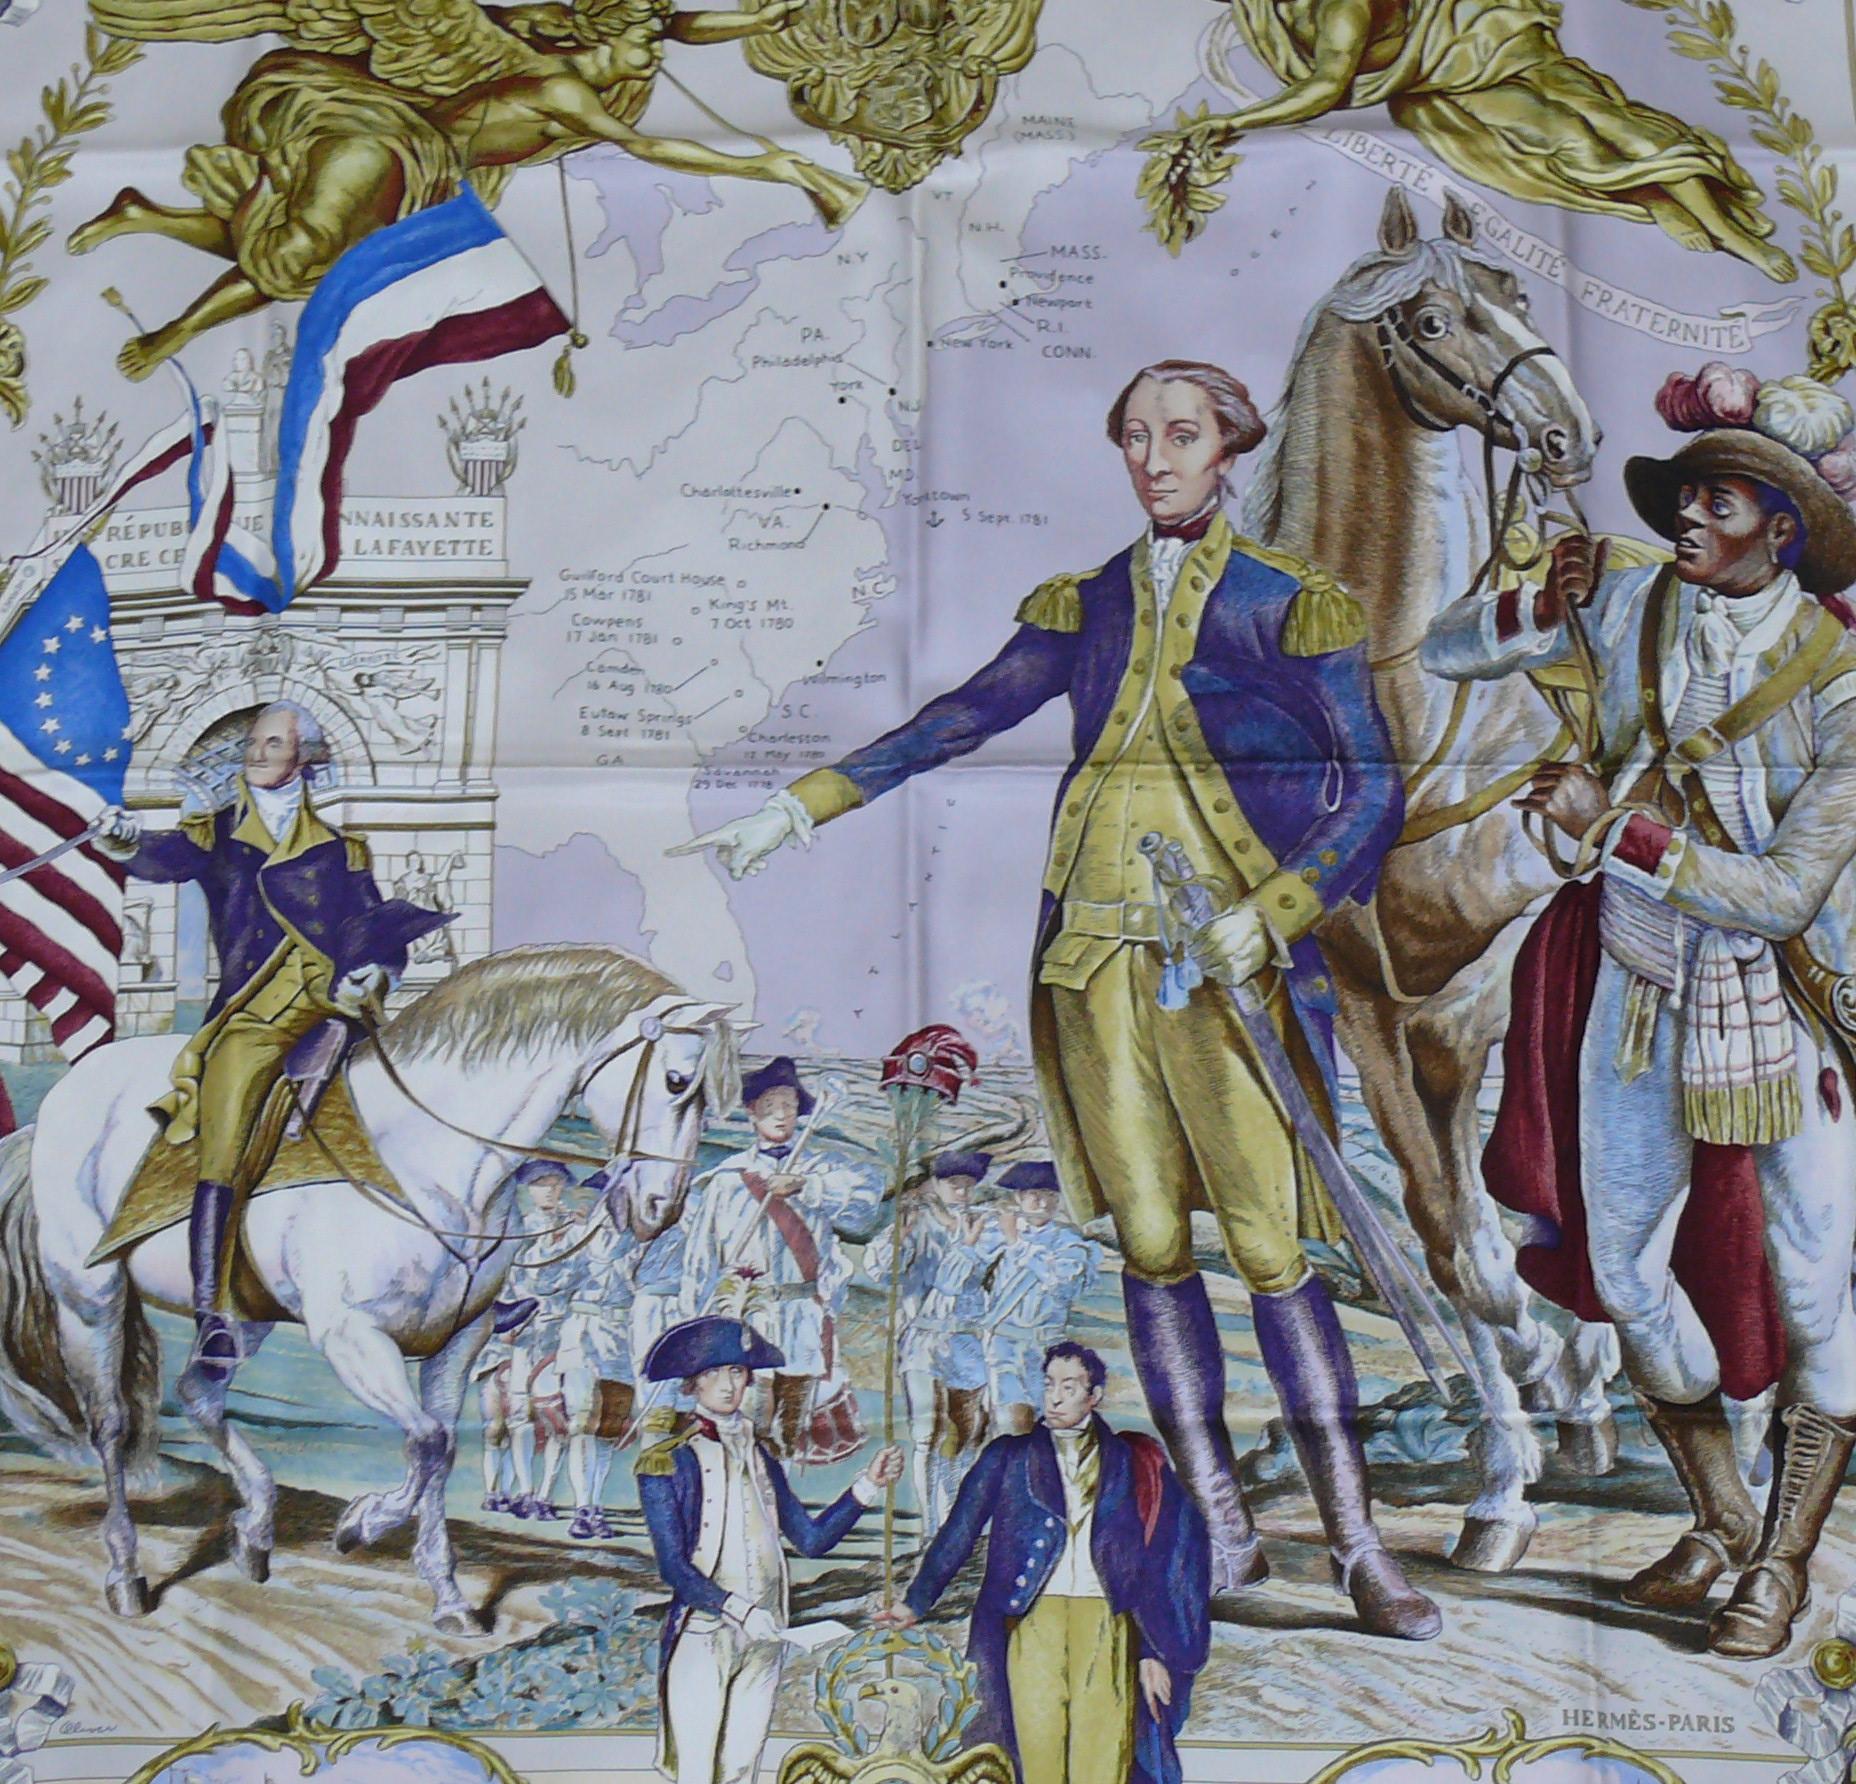 HERMES silk carre scarf MARQUIS DE LAFAYETTE designed by native Texan KERMIT OLIVER.

Composition and care tag still attached.

Marked HERMES PARIS, © HERMES and signed OLIVER.

Indicative measurements : 88 cm x 88 cm (34.65 inches x 34.65